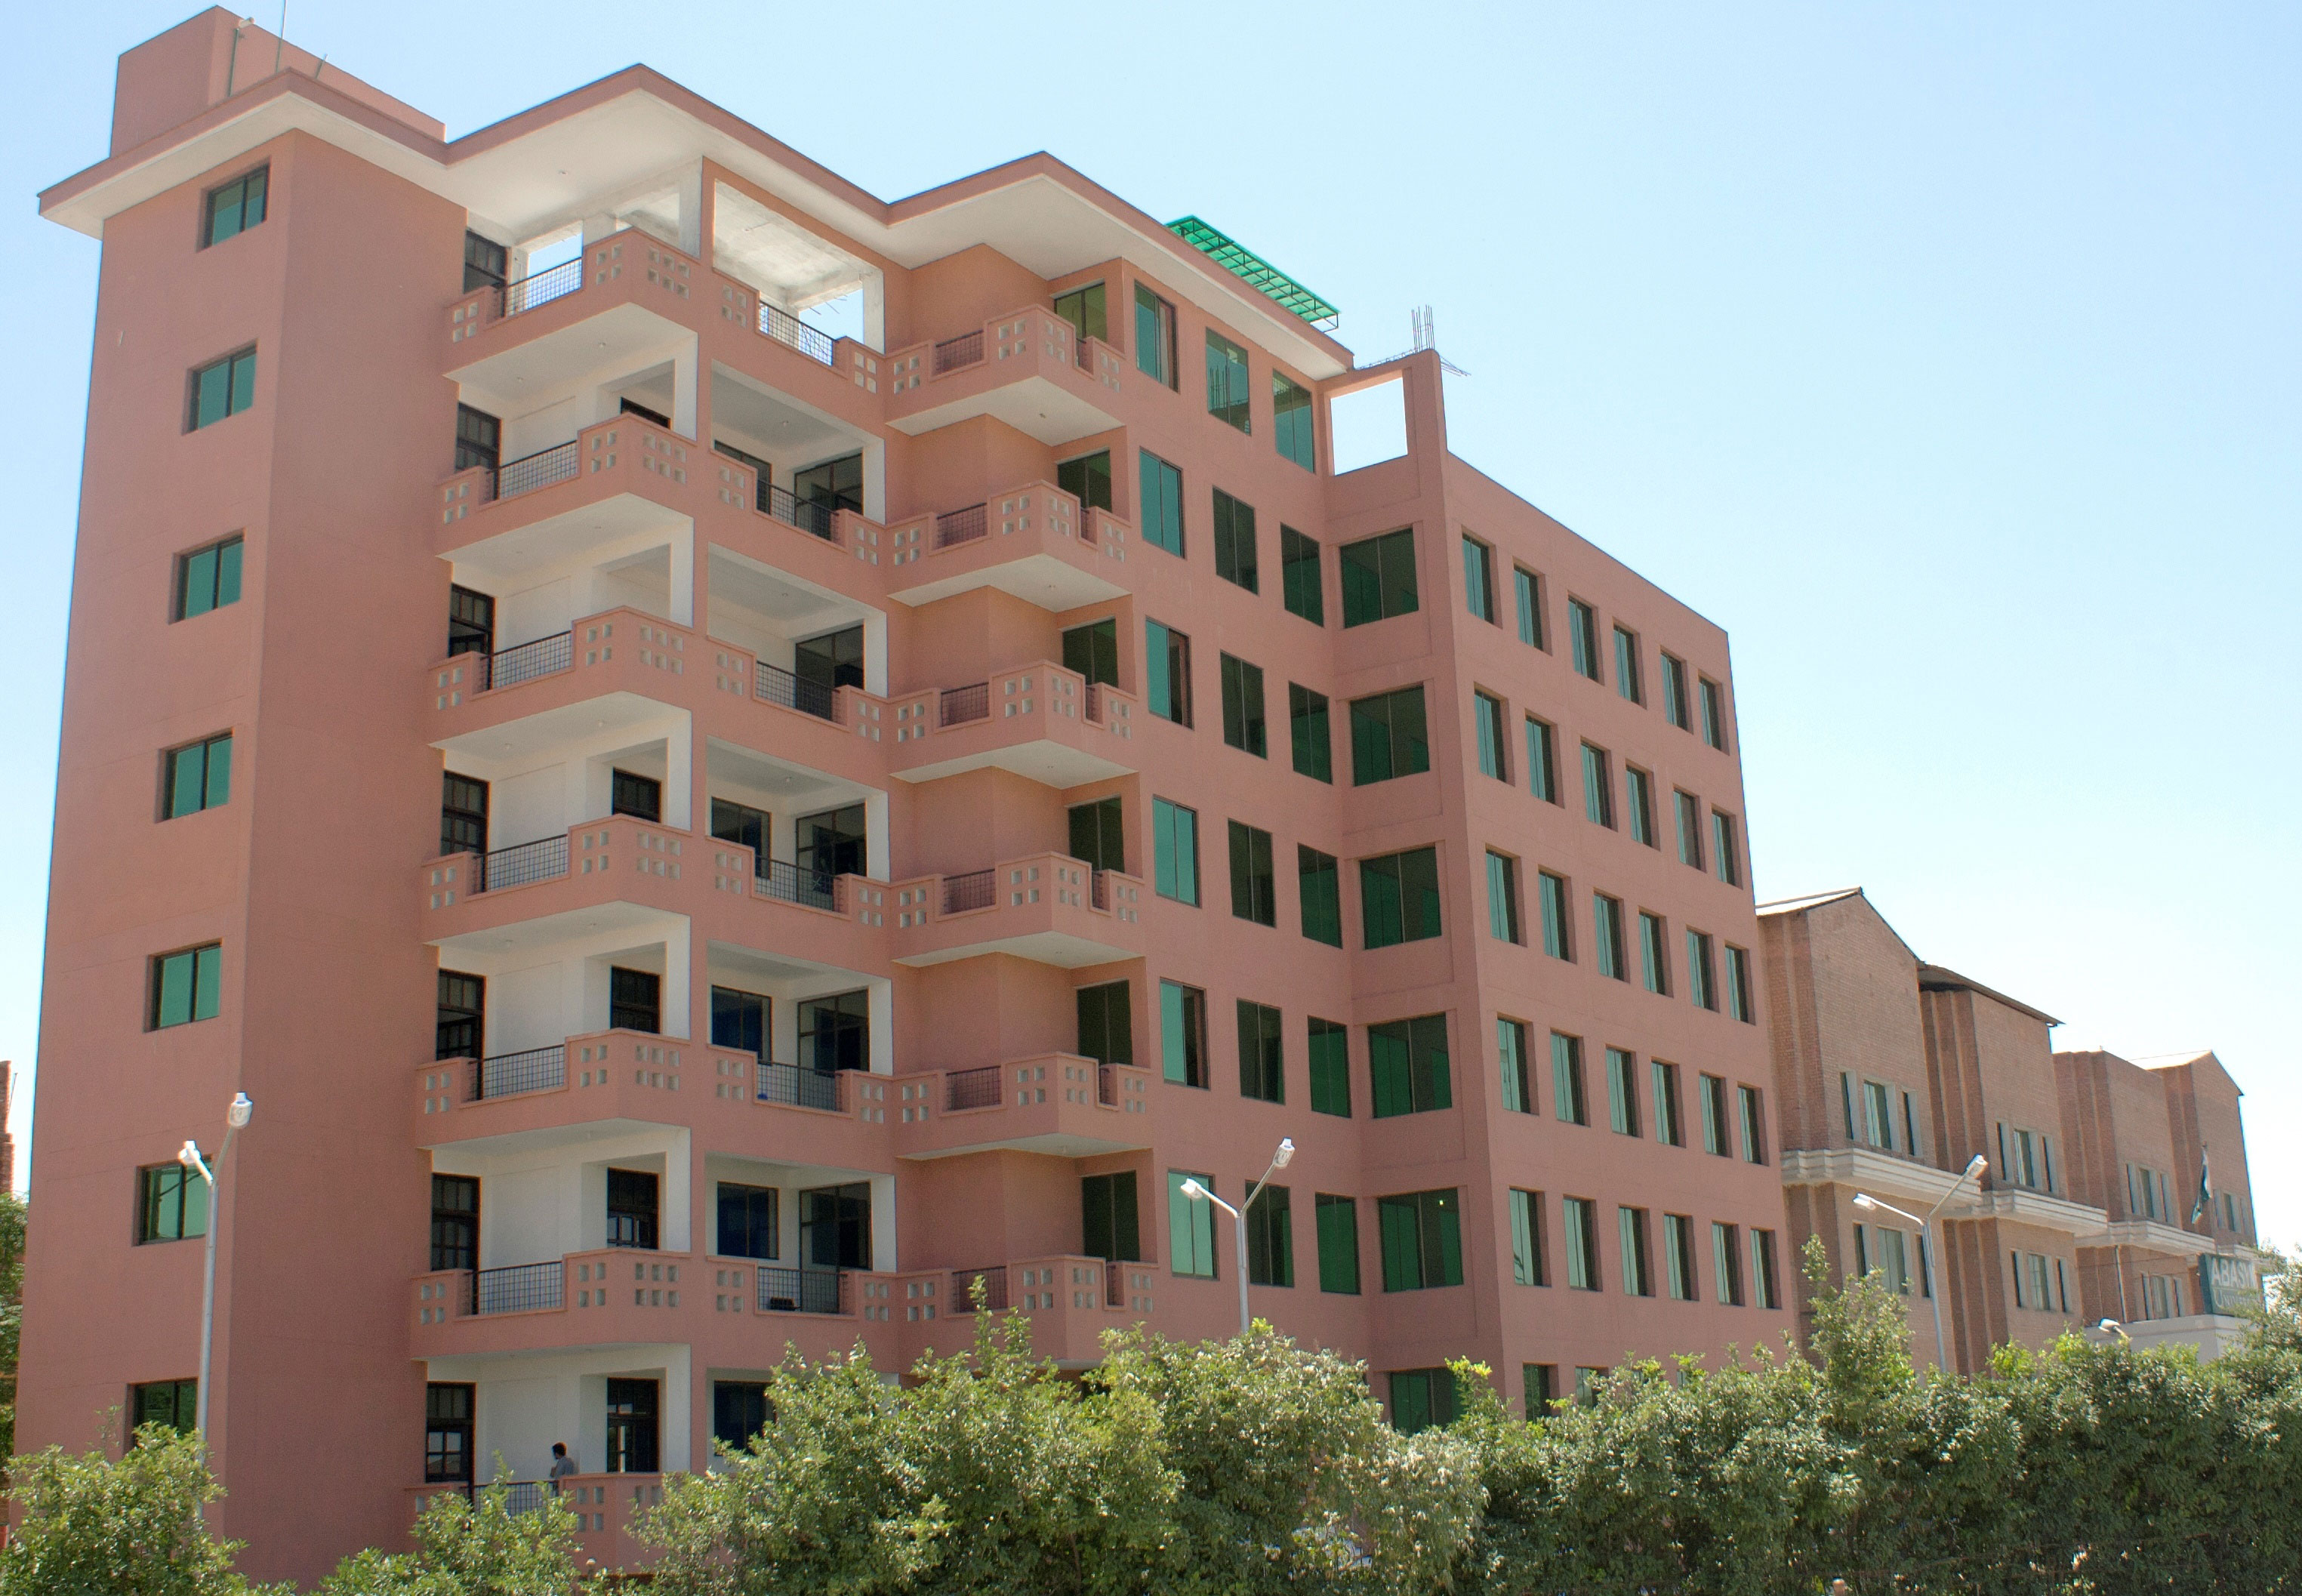 Science & Technology Building